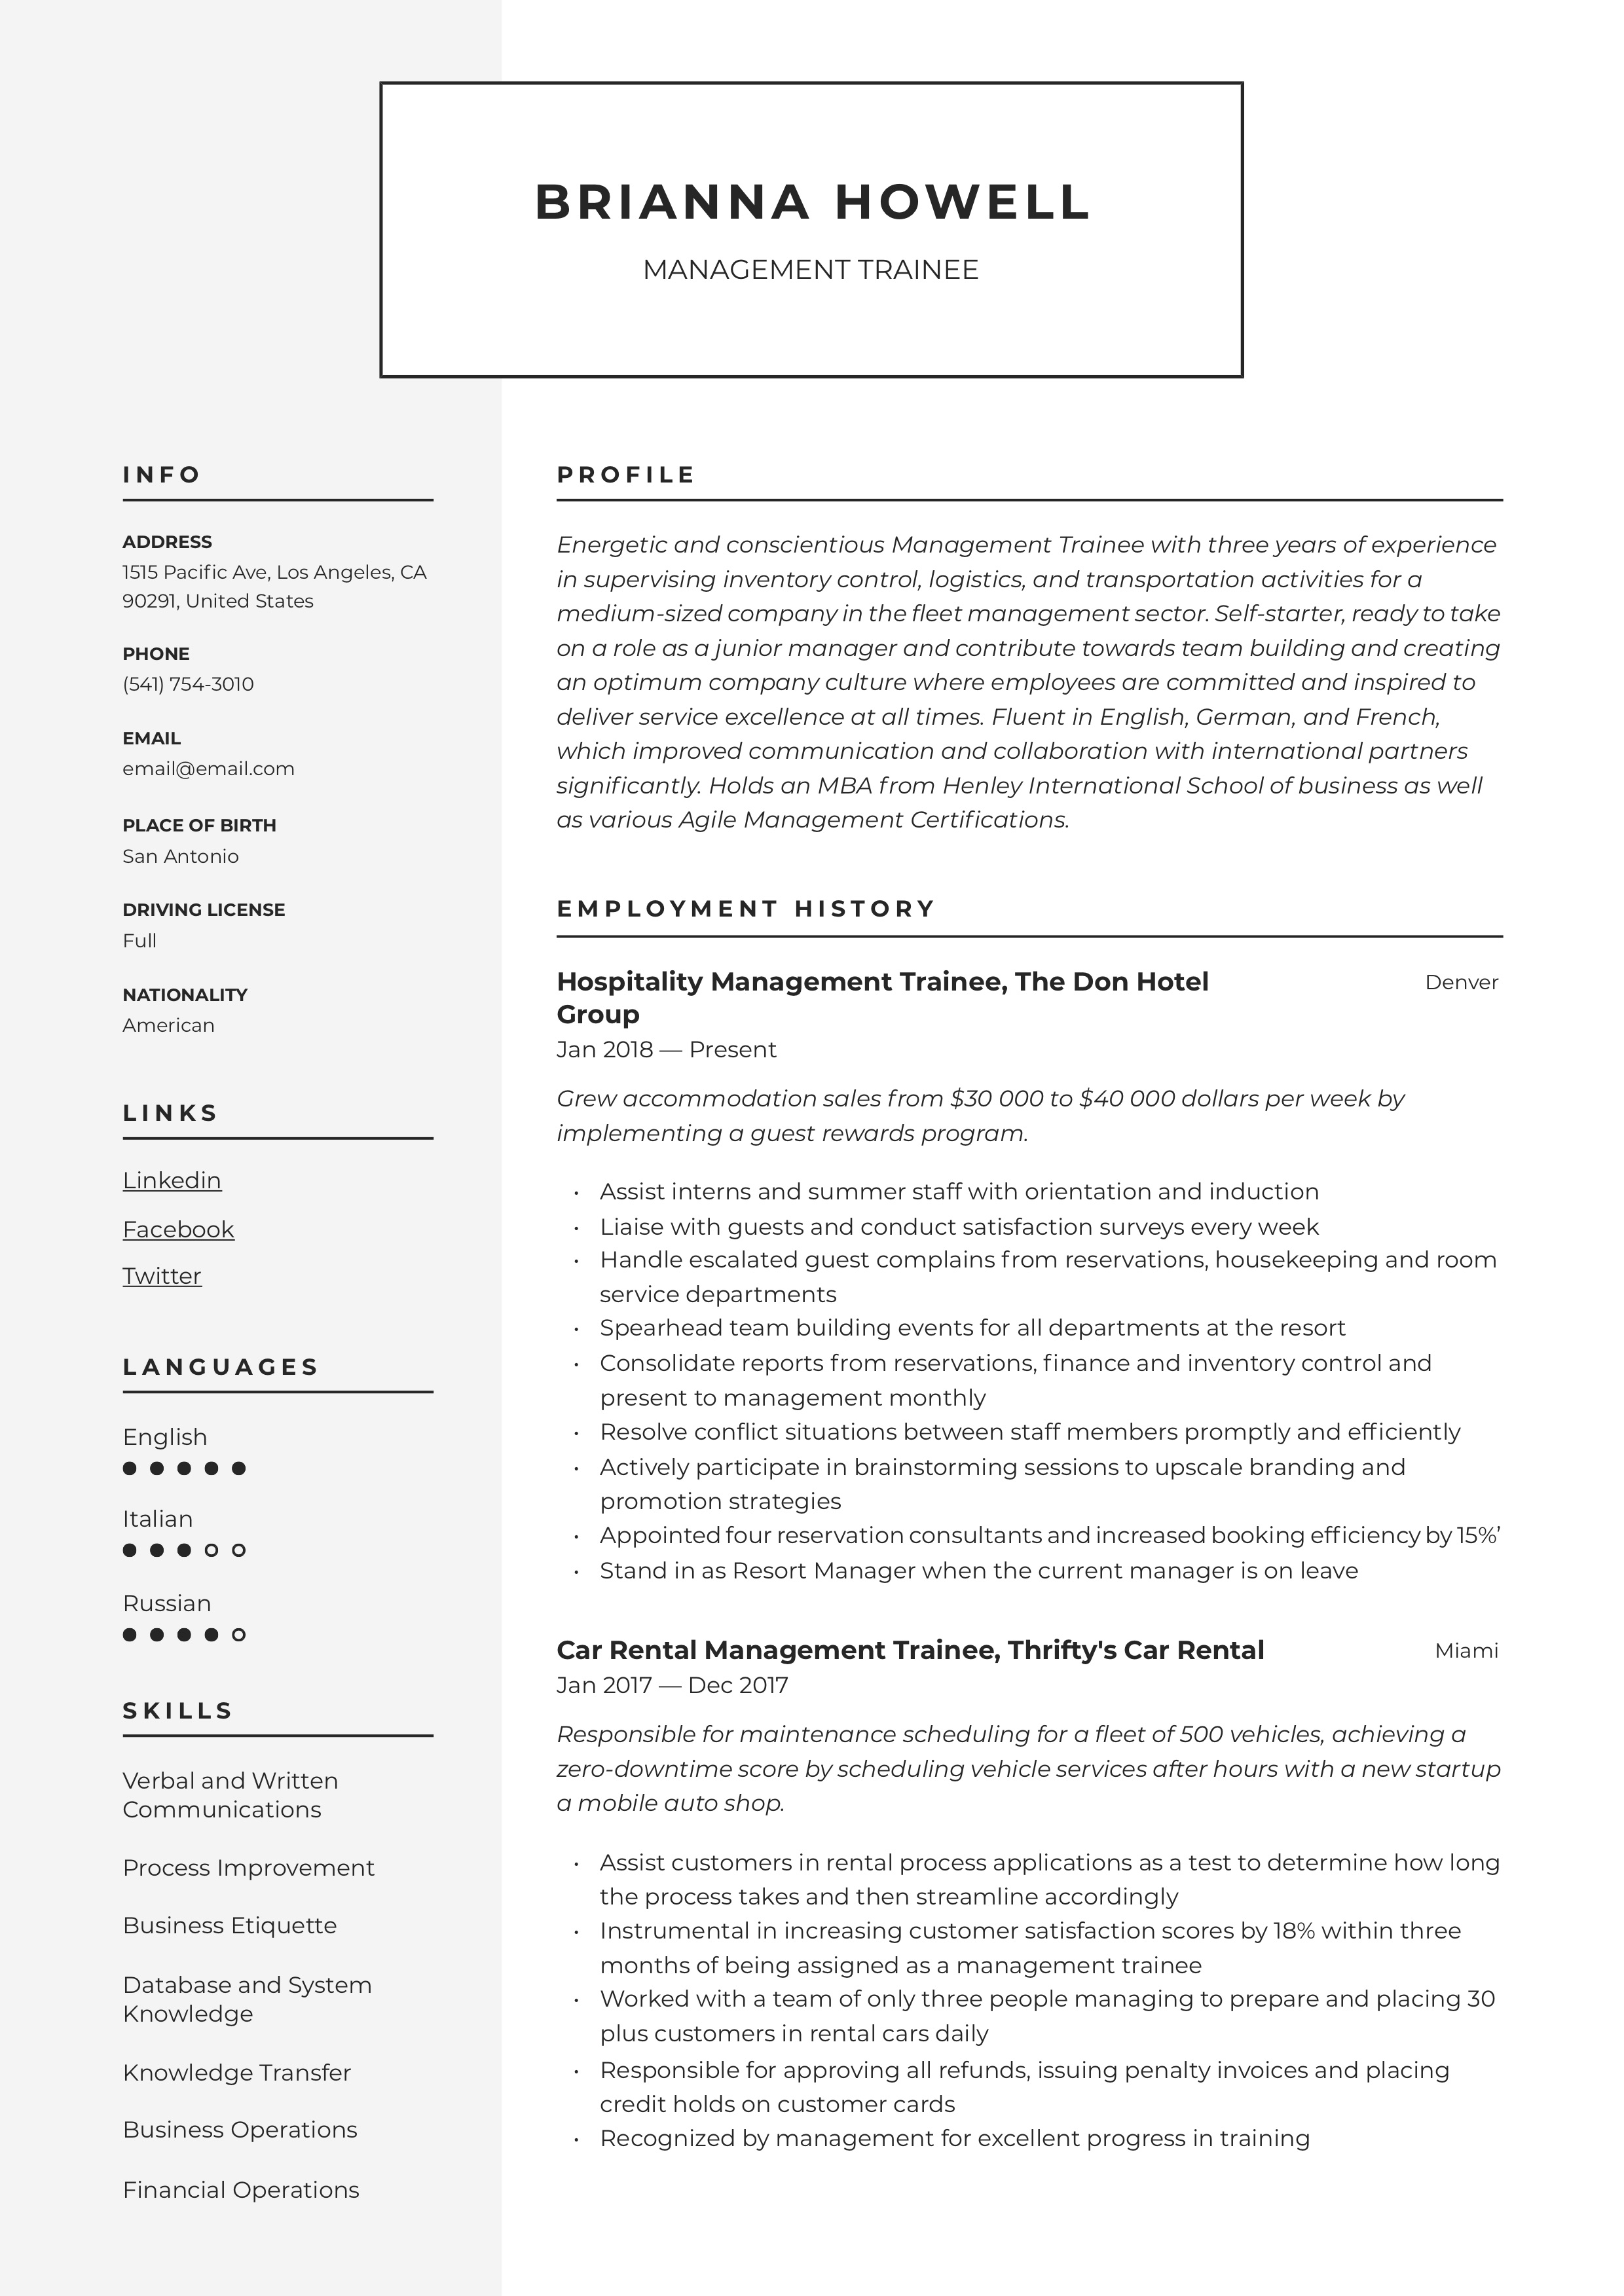 Resume Template Management Trainee